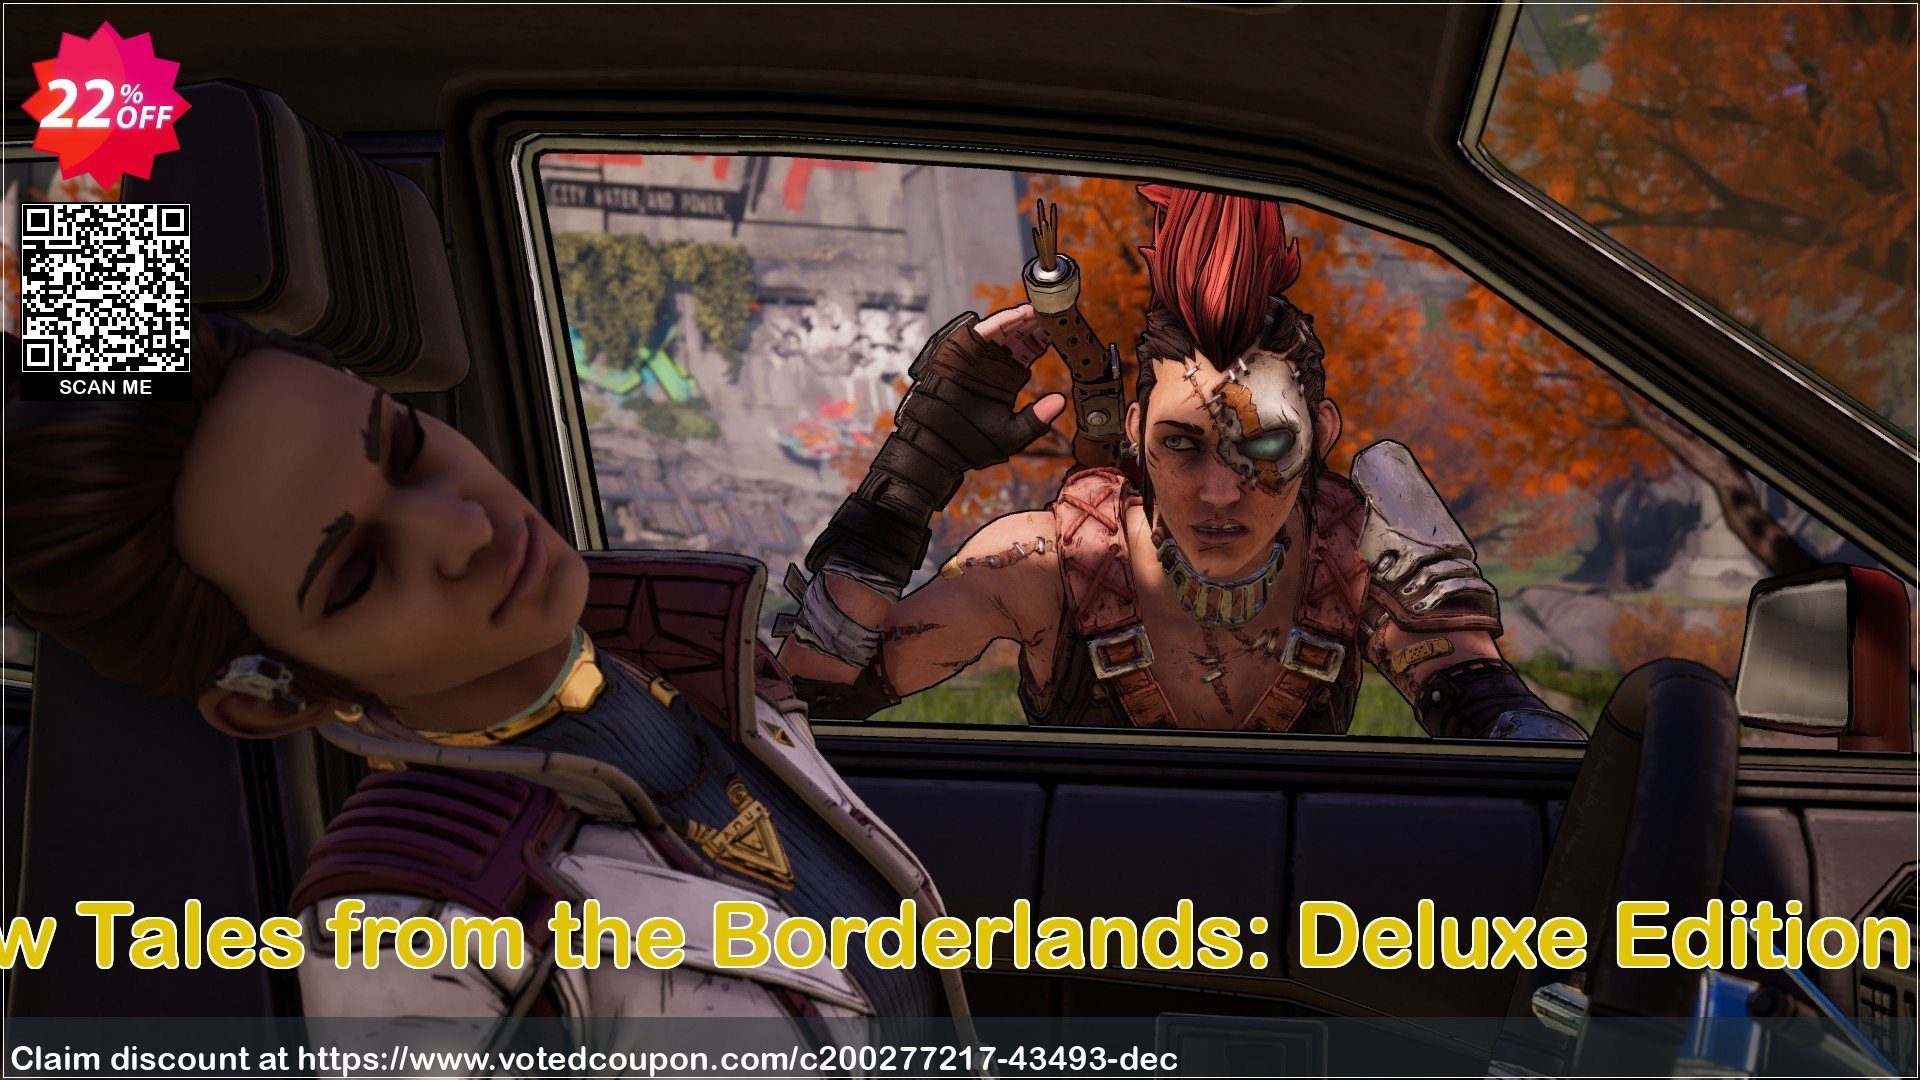 New Tales from the Borderlands: Deluxe Edition PC Coupon Code May 2024, 22% OFF - VotedCoupon